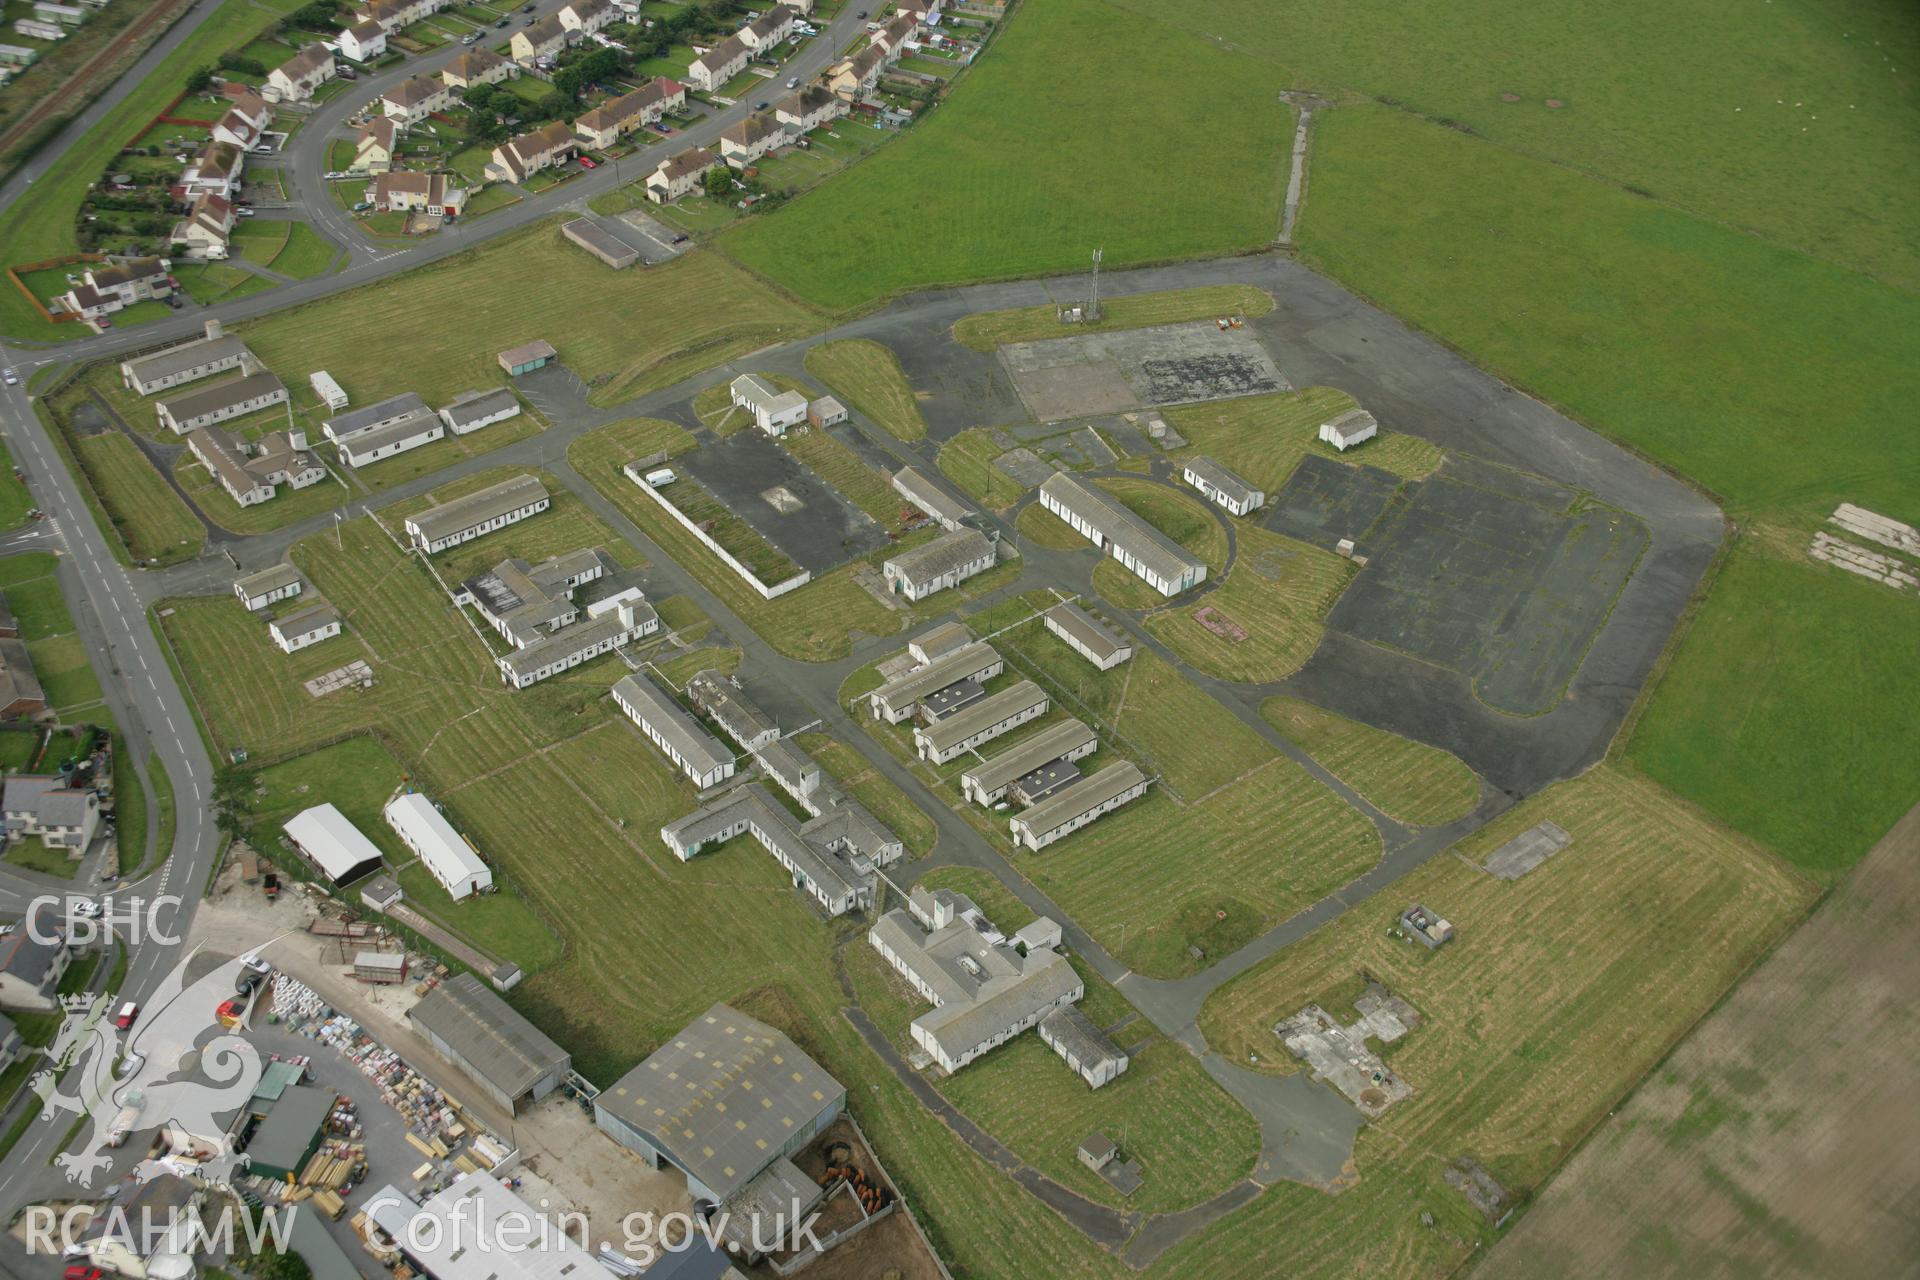 RCAHMW colour oblique photograph of Towyn airfield;Morfa town airfield, Tywyn. Taken by Toby Driver on 08/10/2007.